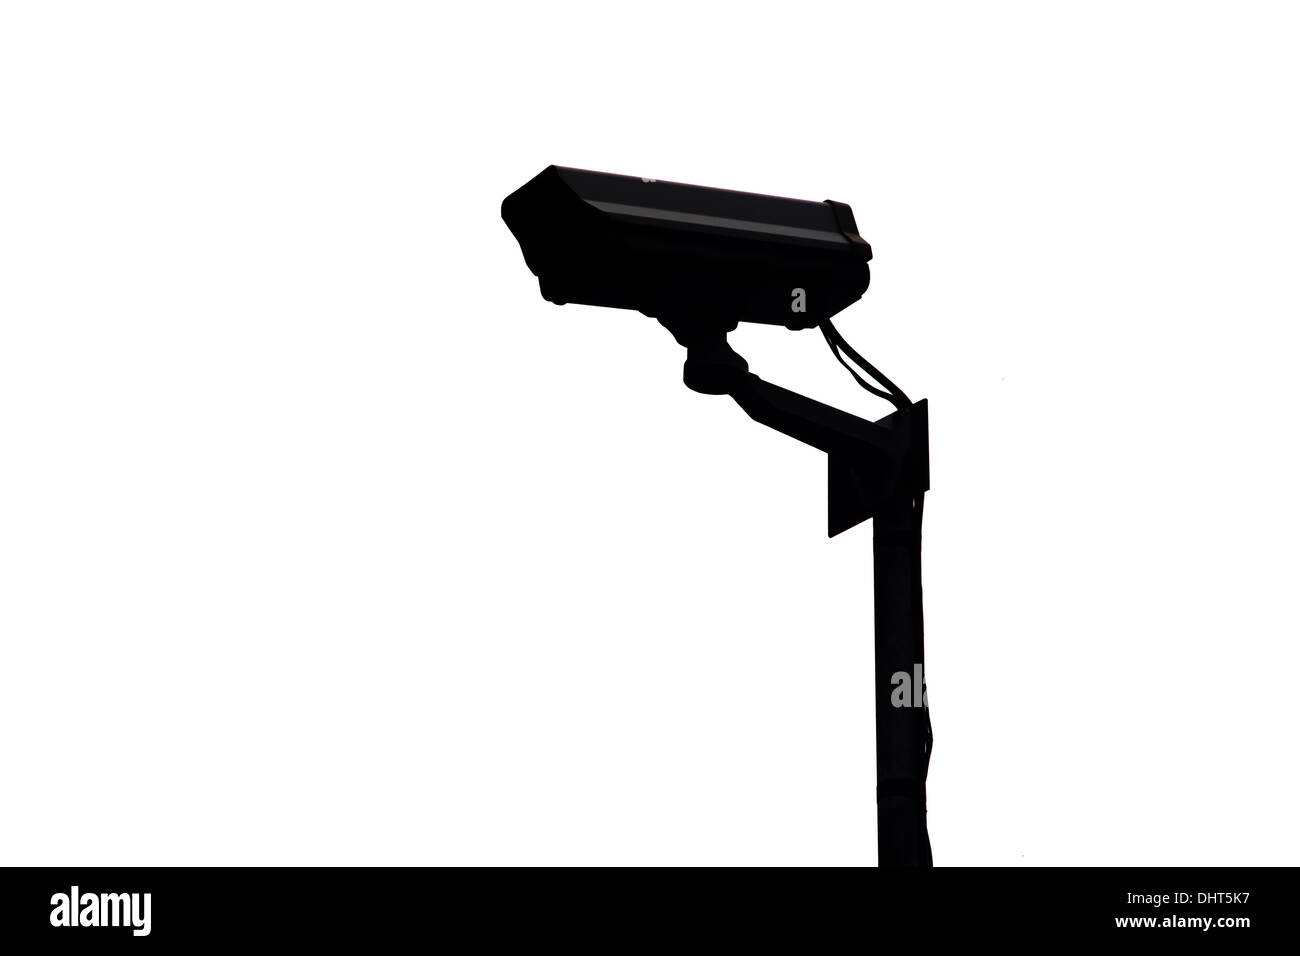 System of CCTV security camera in the Shadow. Stock Photo